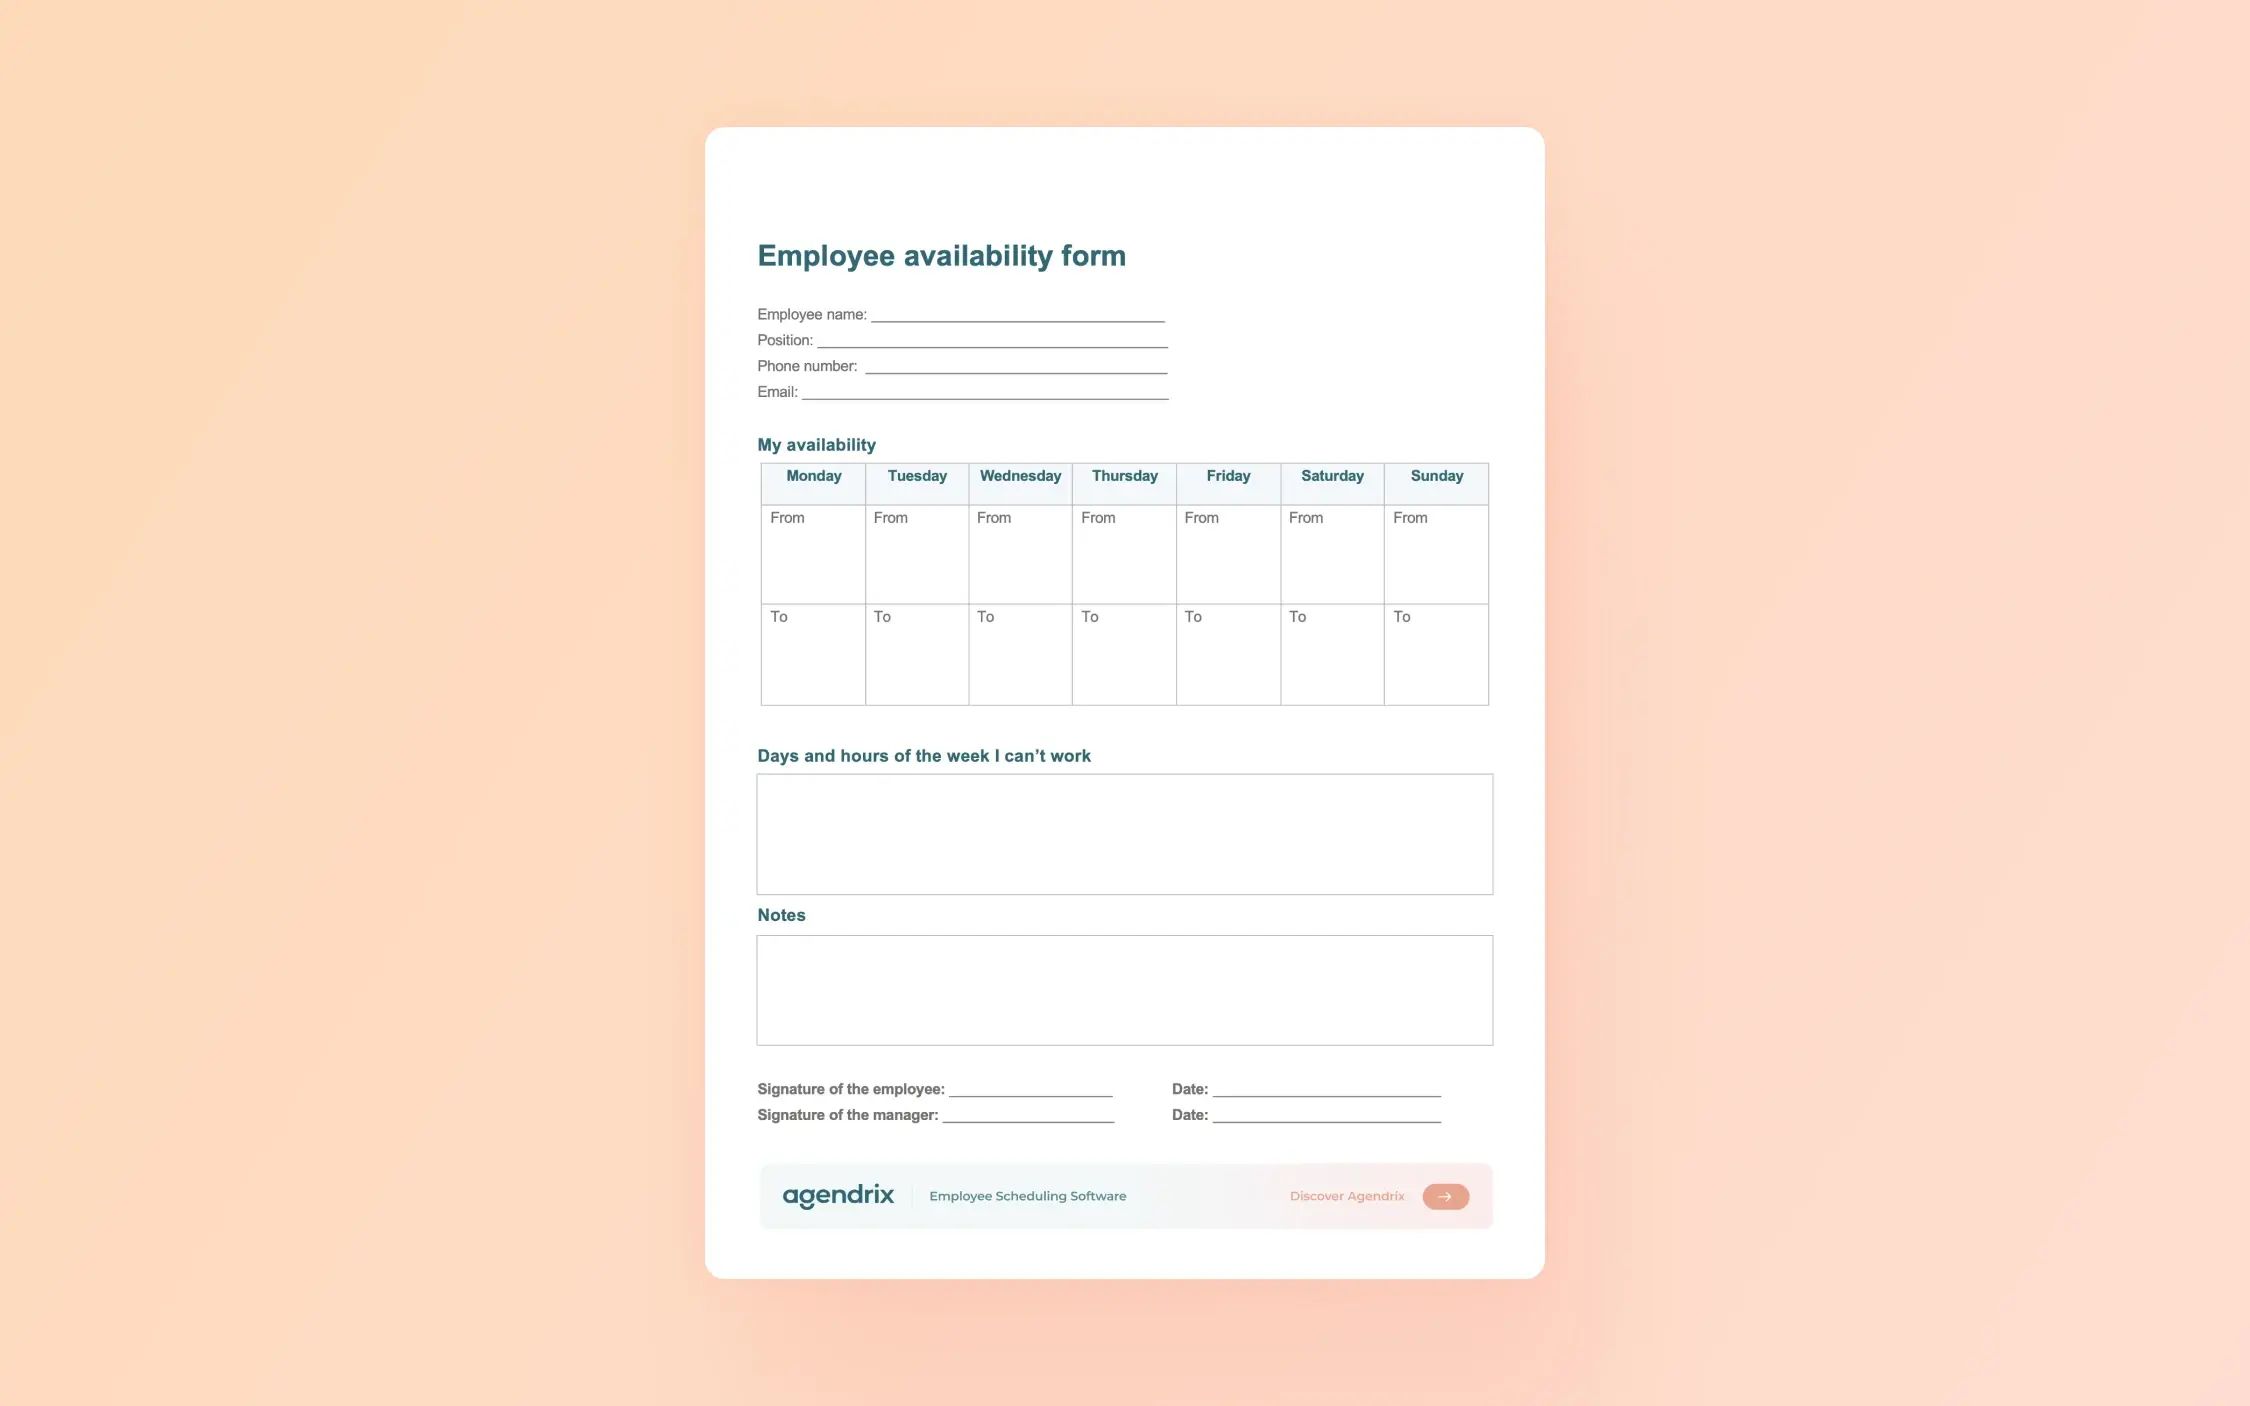 Employee availability form on a Word document